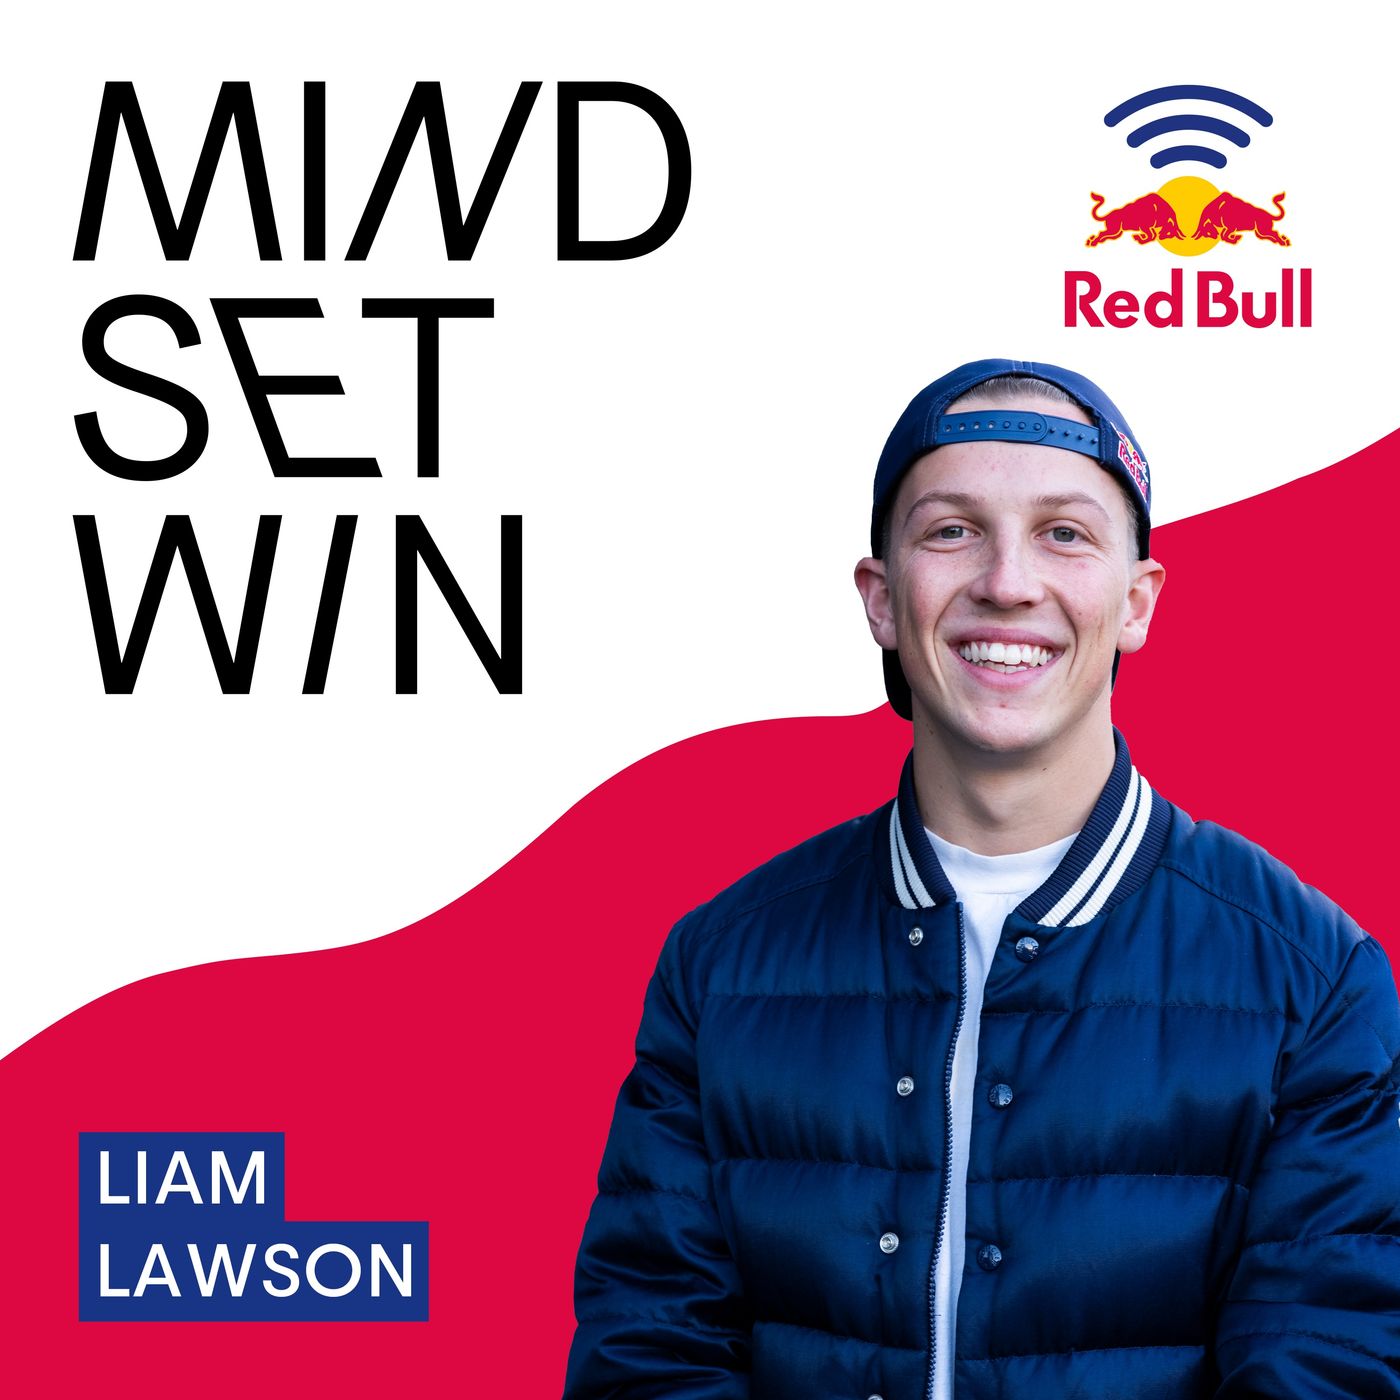 Liam Lawson (Part A) – How an F1 driver functions under pressure